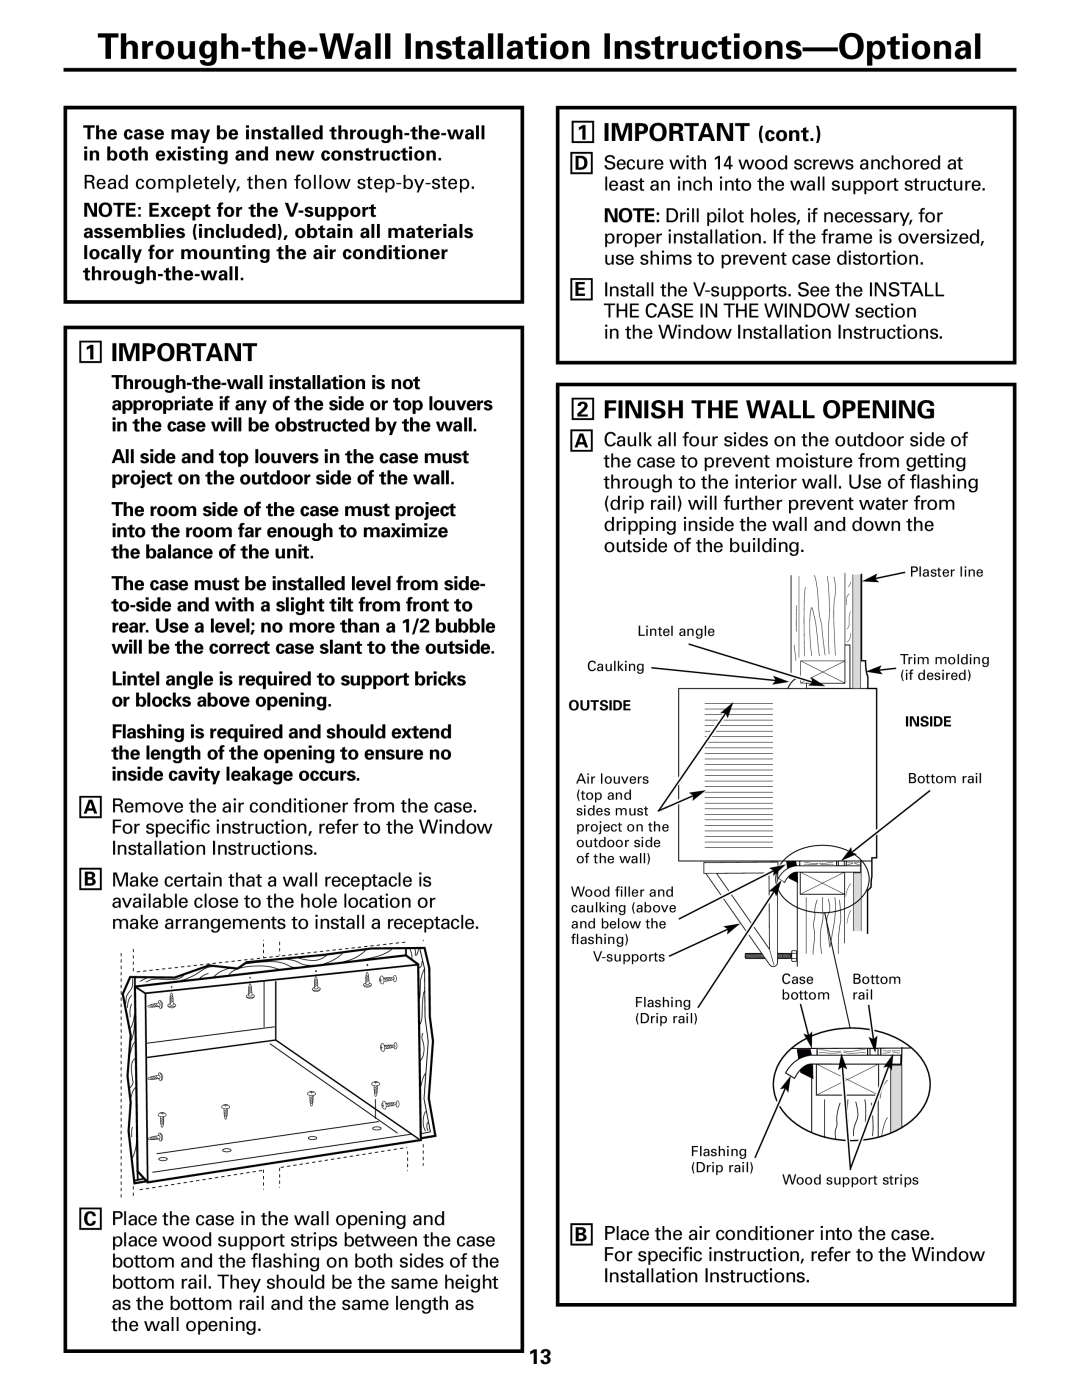 GE ASQ28 owner manual 1IMPORTANT cont, 2FINISH THE WALL OPENING 